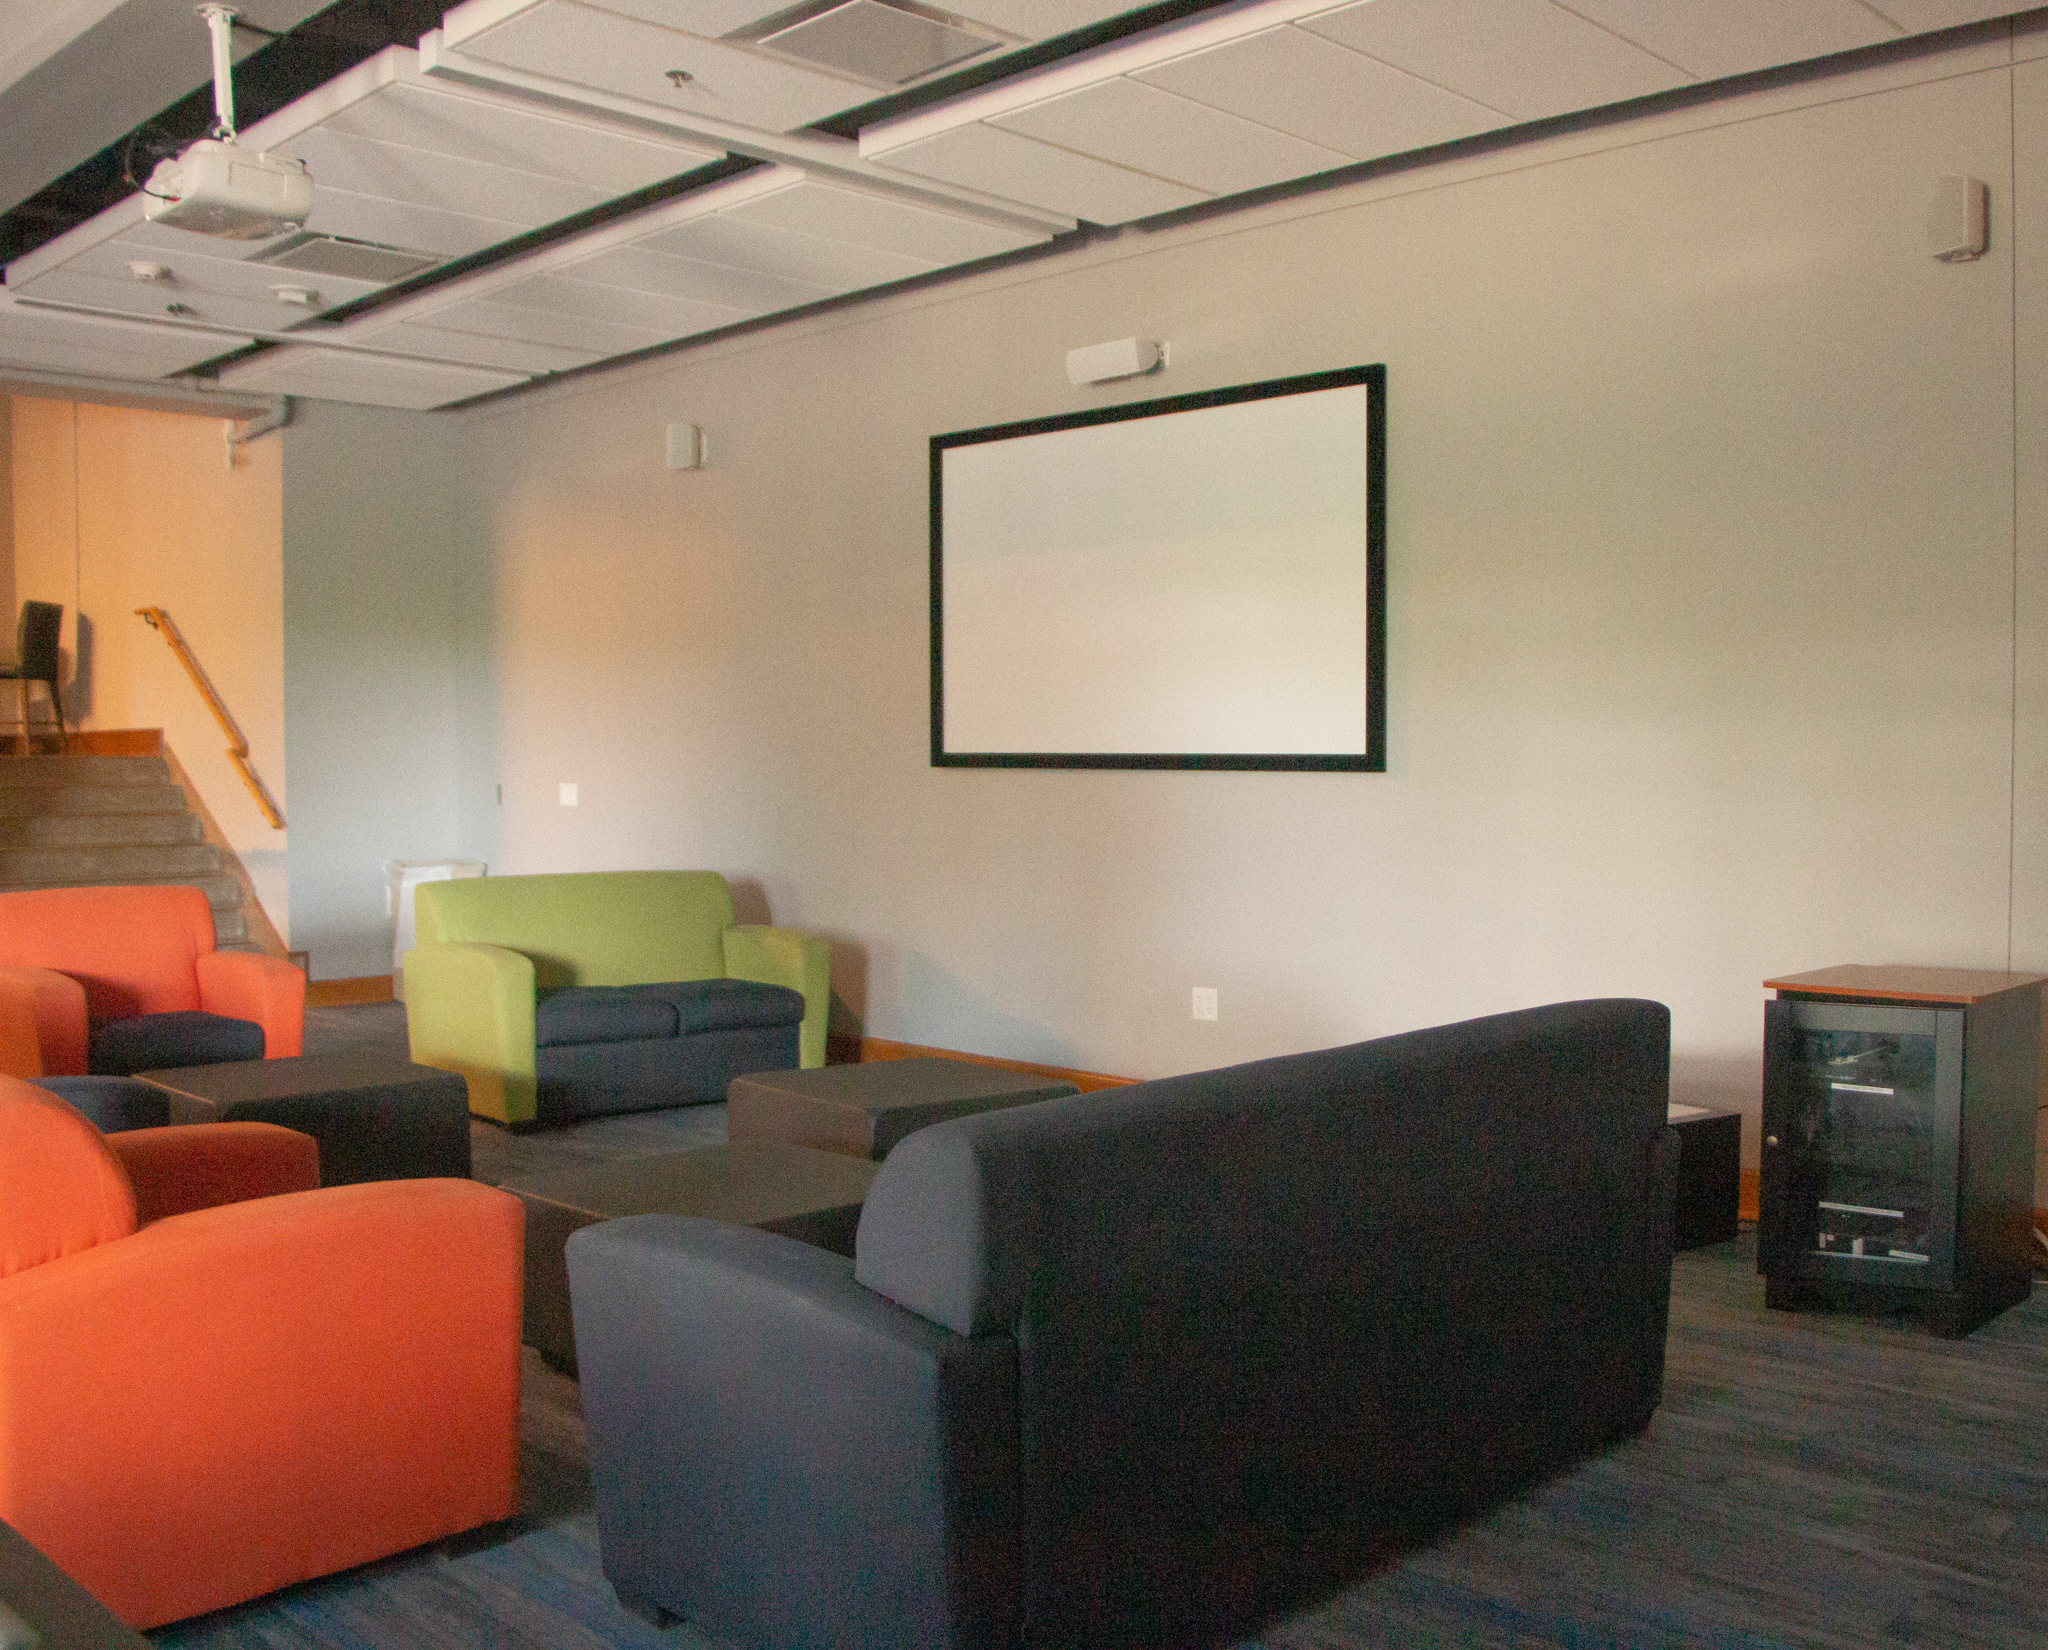 Another view of Delzell Game room seating areas with white wall mounted screen and screen mounted projector.